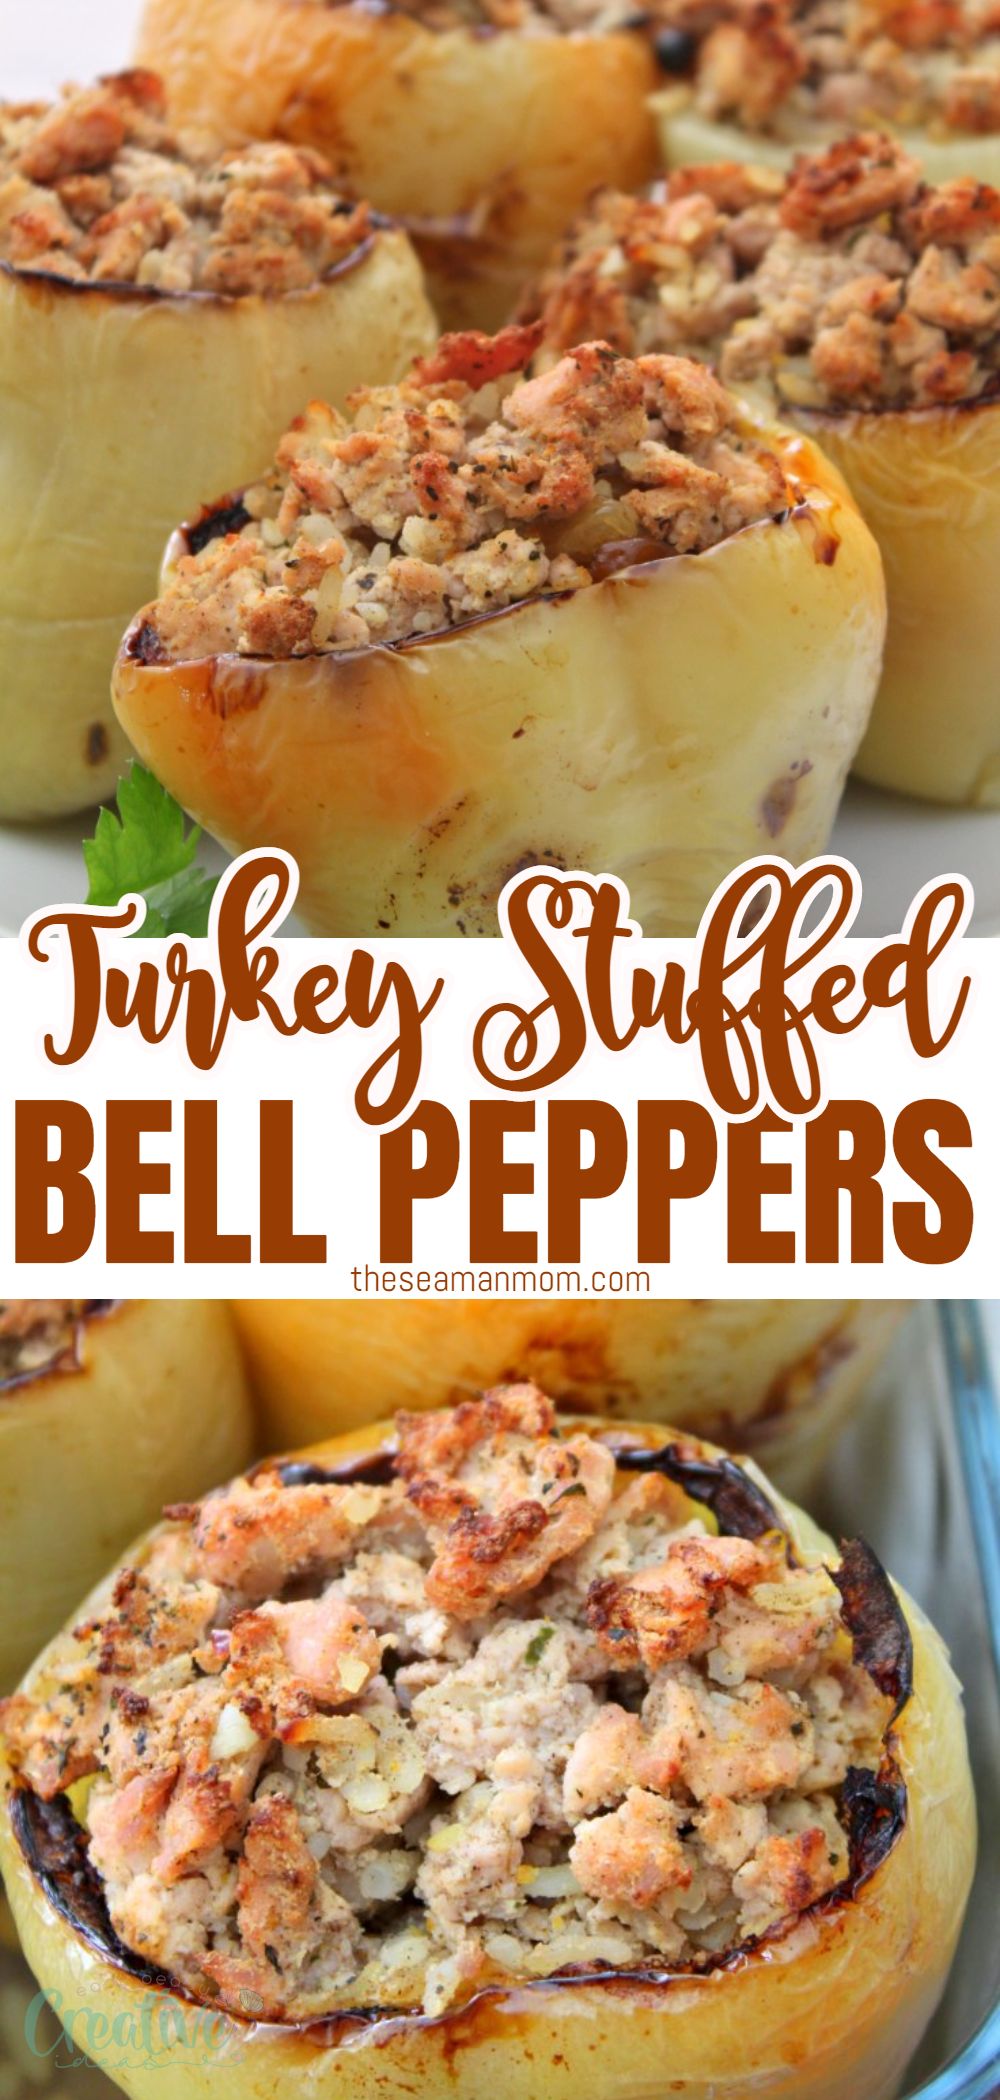 Ever heard of microwaved Moroccan stuffed peppers? These turkey stuffed bell peppers are super quick to make in the microwave oven and are sweet and savory and very, very aromatic!  via @petroneagu